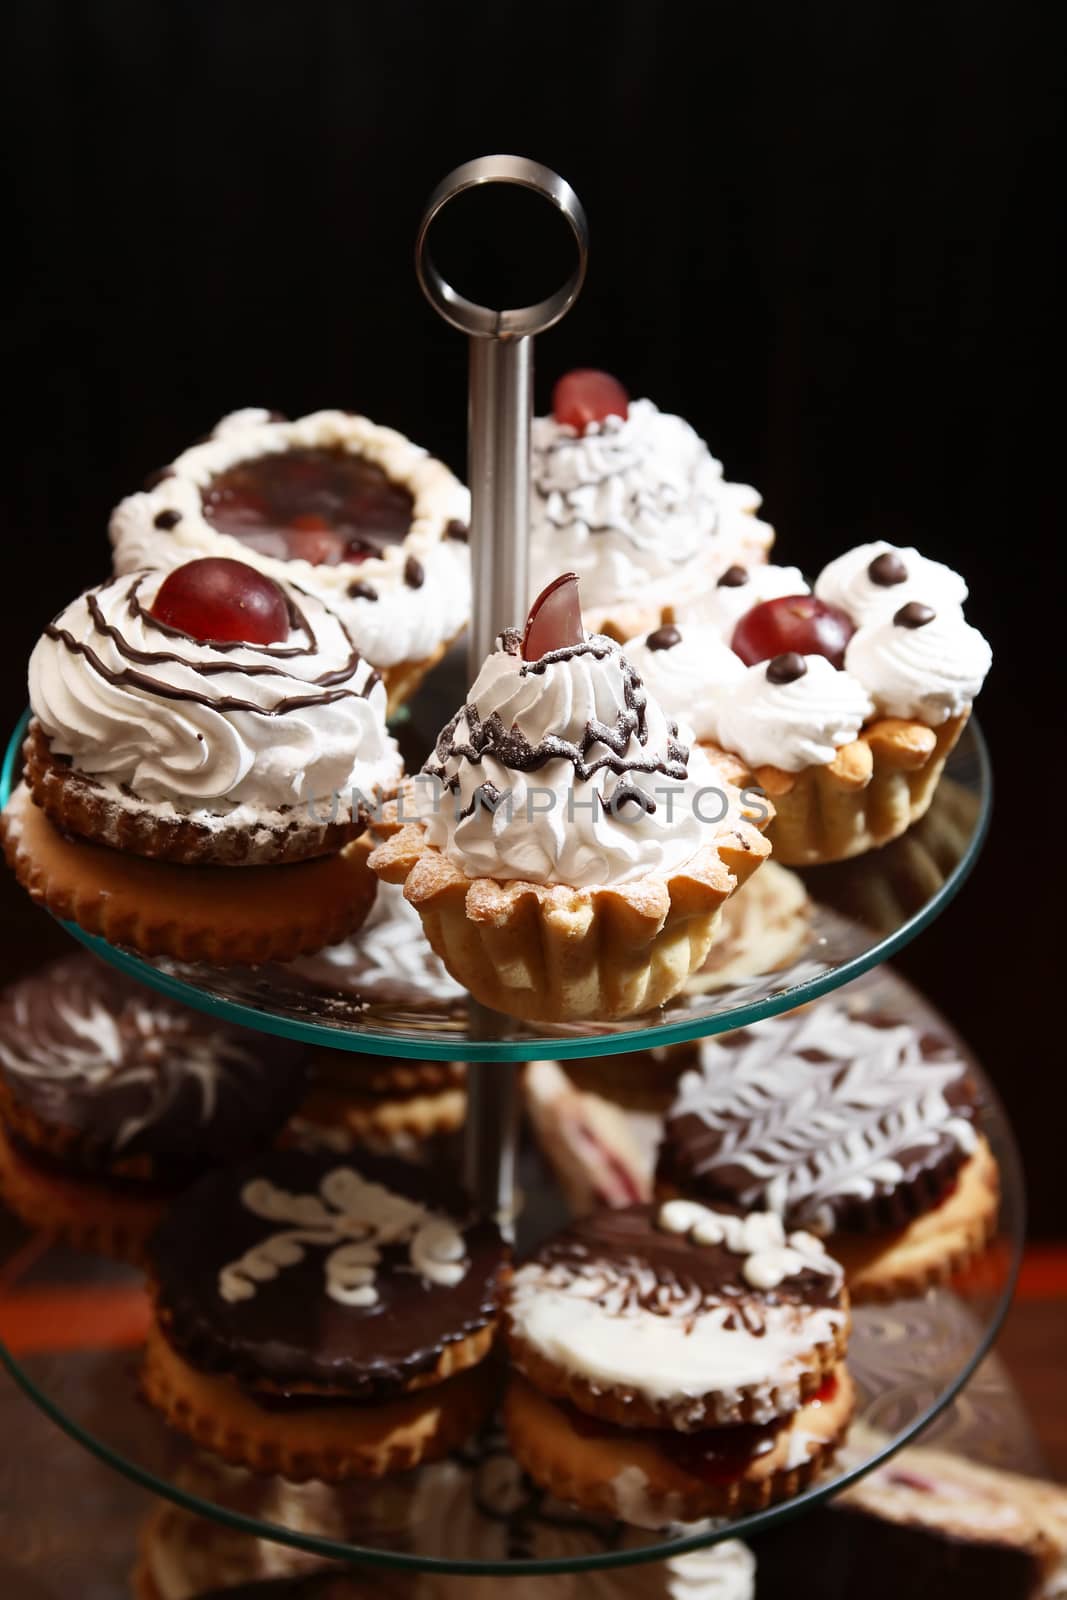 Set of various cakes on stand against dark background